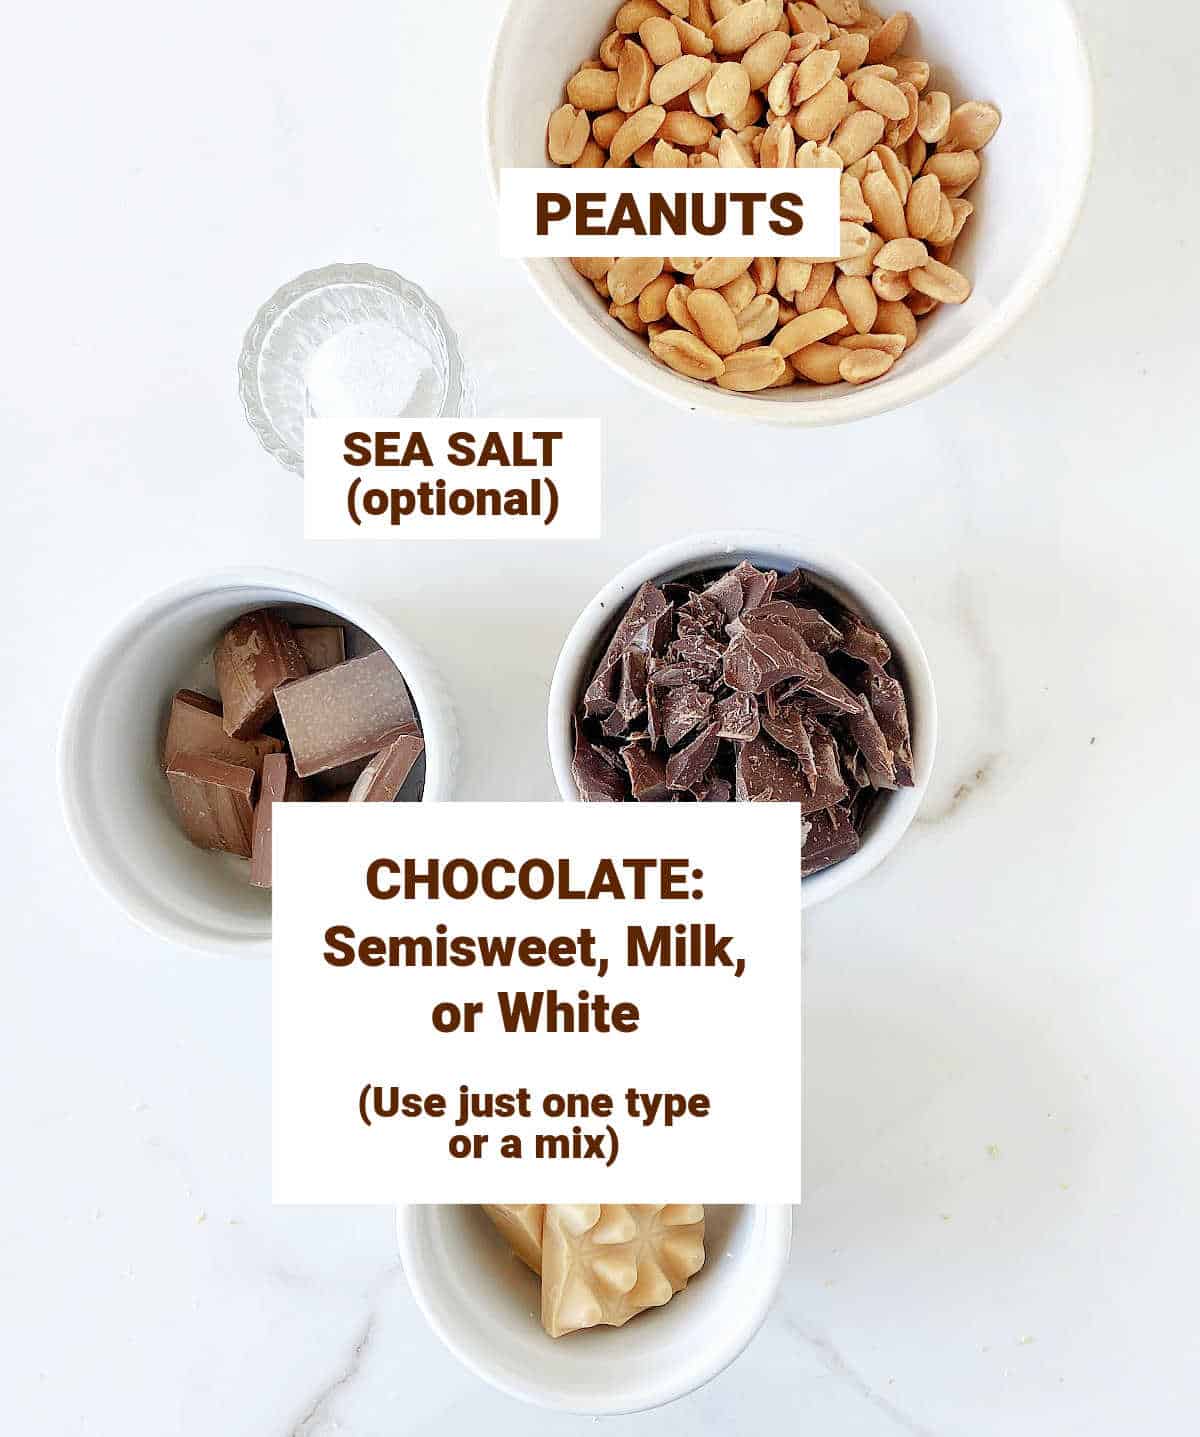 White marble surface with bowls containing different chocolates, peanuts and salt.